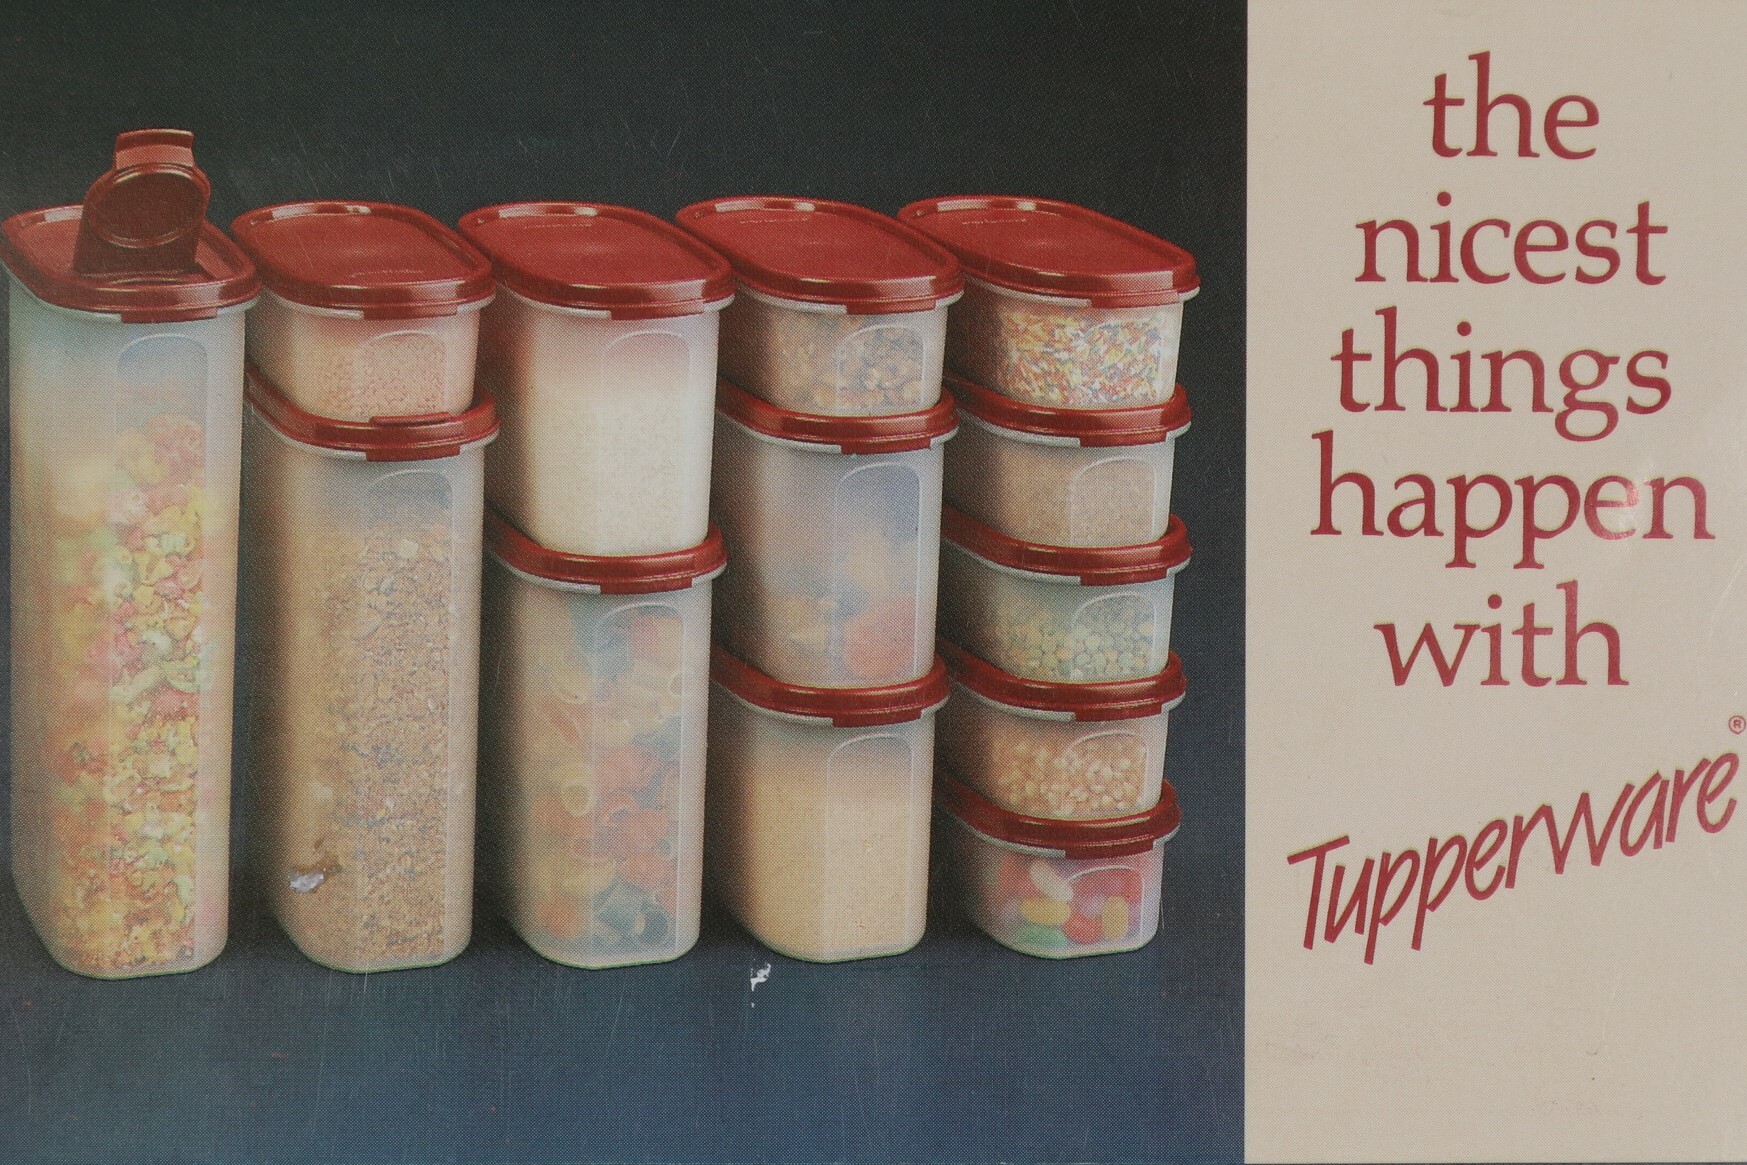 A Tupperware party invitation postcard showcasing some Tupperware products. Canterbury Museum 2004.39.5591